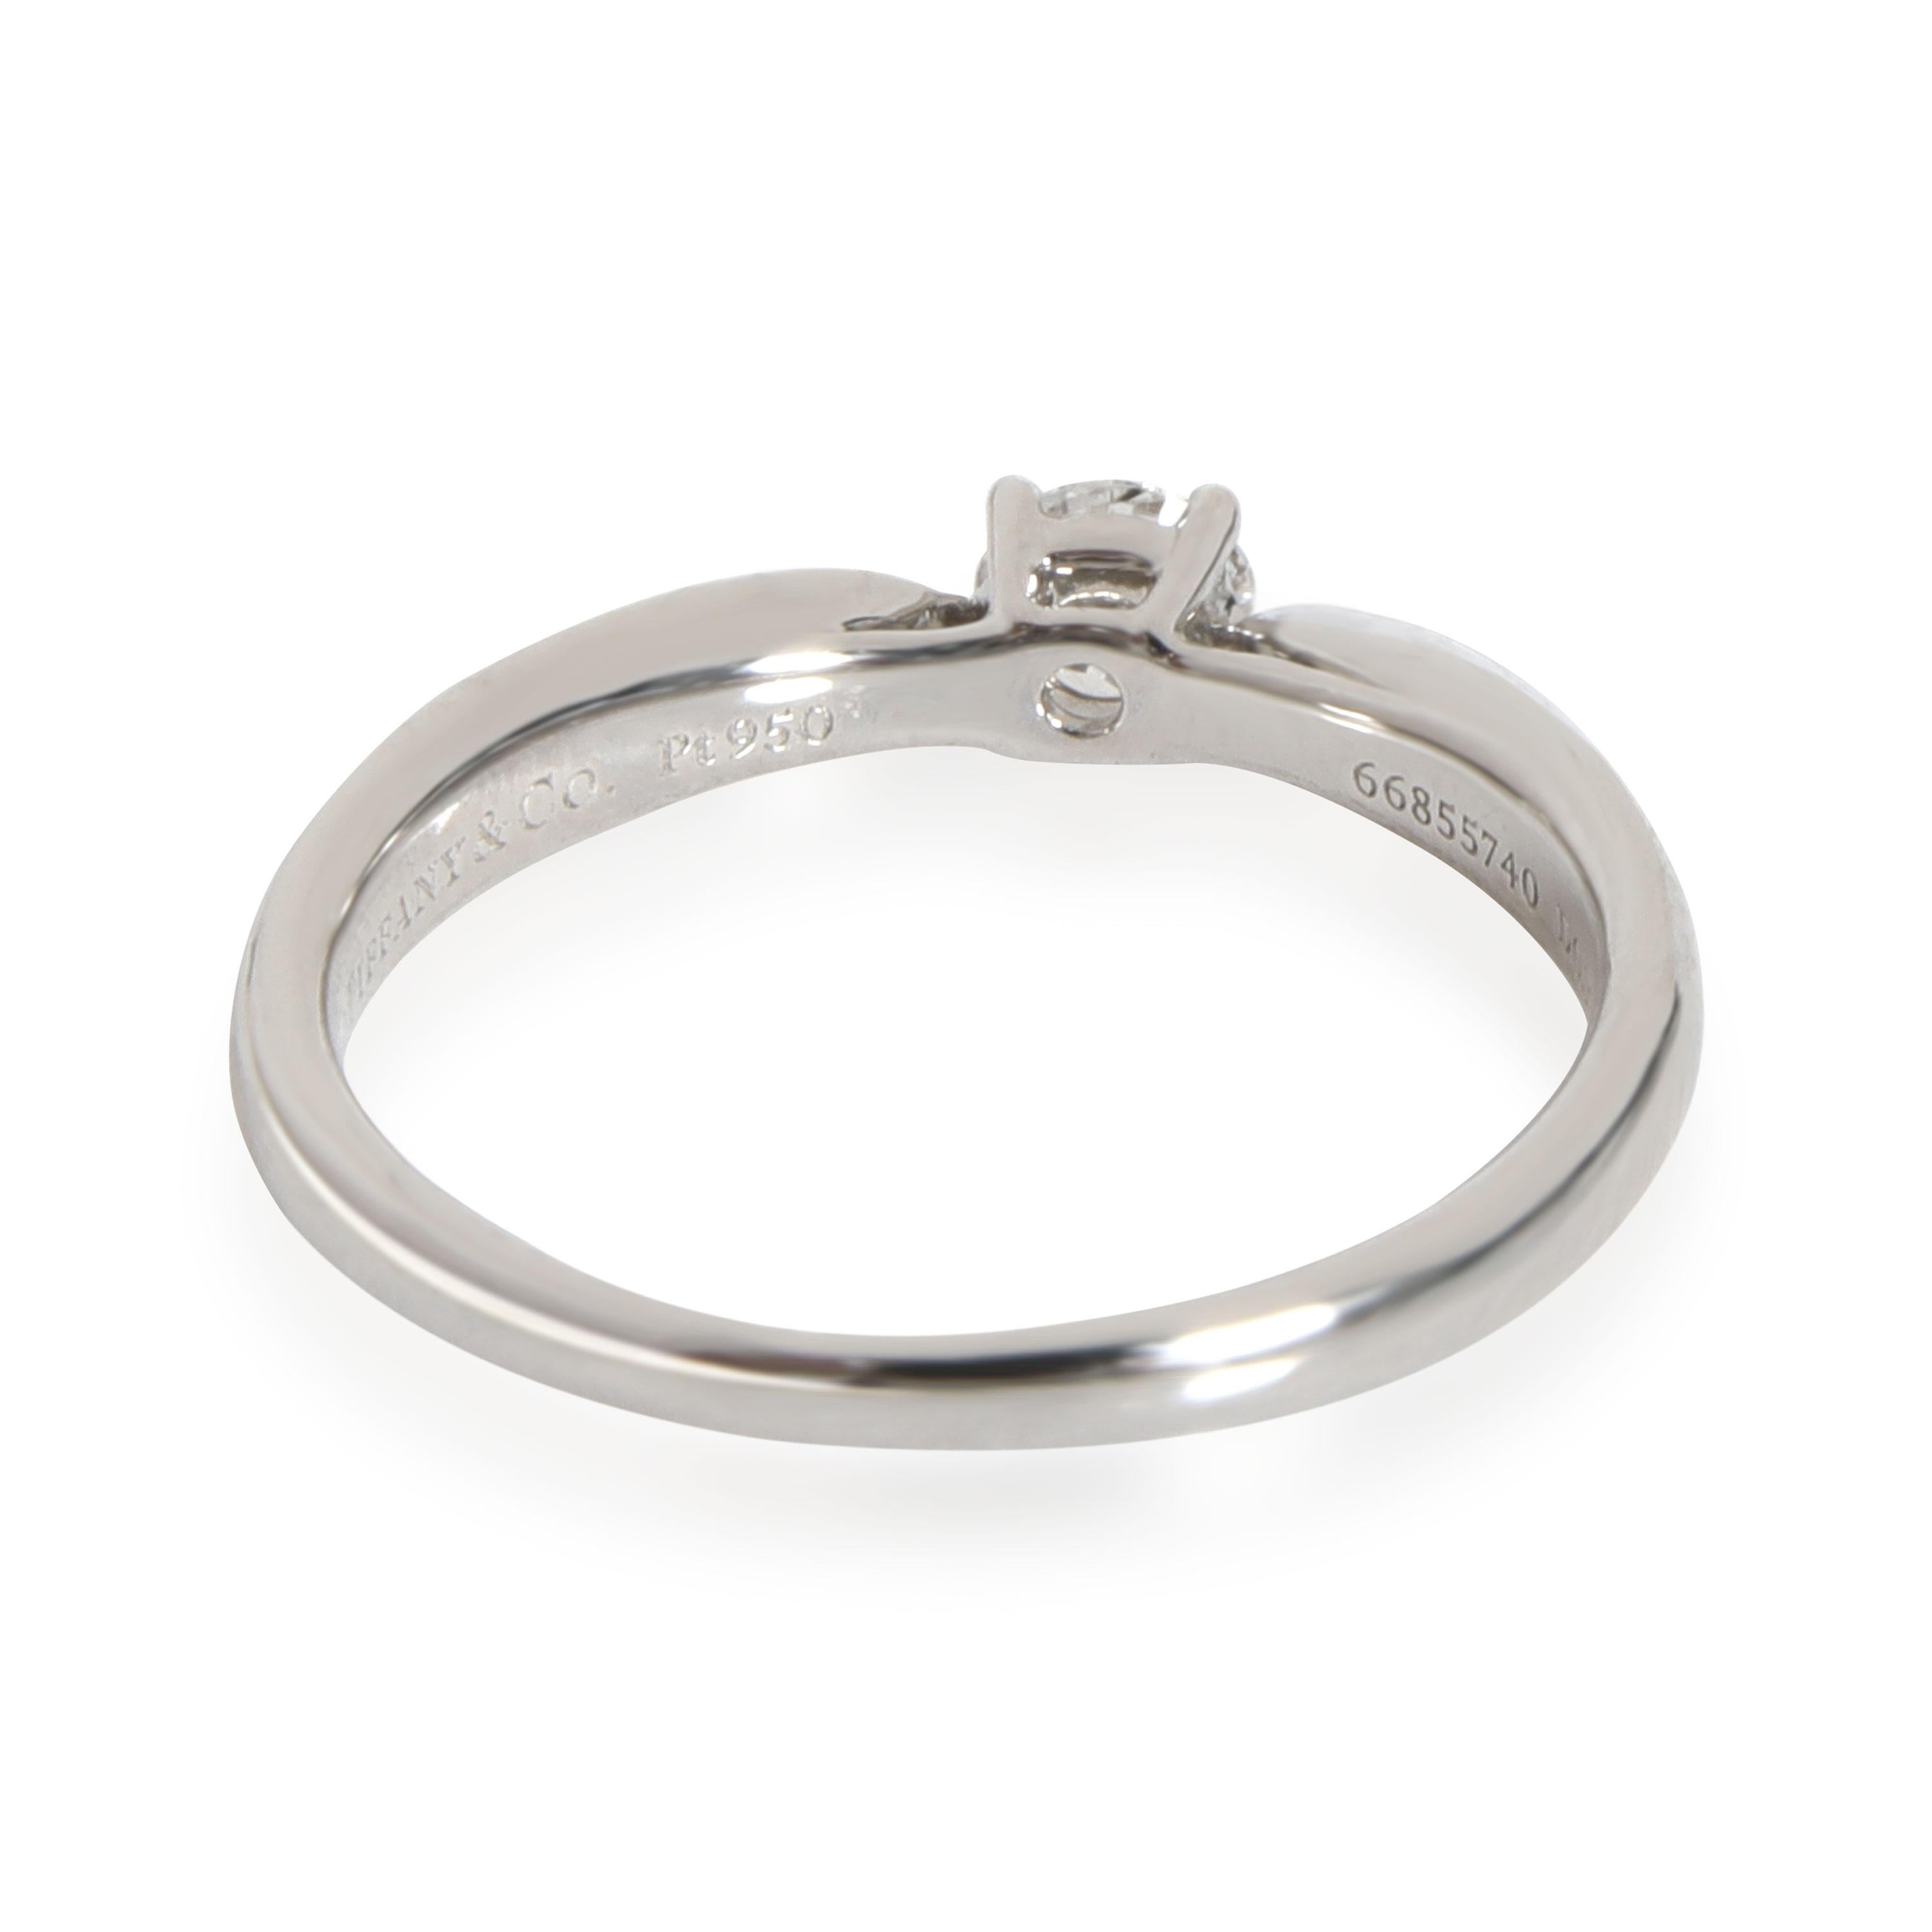 Tiffany & Co. Harmony Diamond Engagement Ring in Platinum E VS1 0.19 CTW

PRIMARY DETAILS
SKU: 110796
Listing Title: Tiffany & Co. Harmony Diamond Engagement Ring in Platinum E VS1 0.19 CTW
Condition Description: Retails for 2,900 USD. In excellent